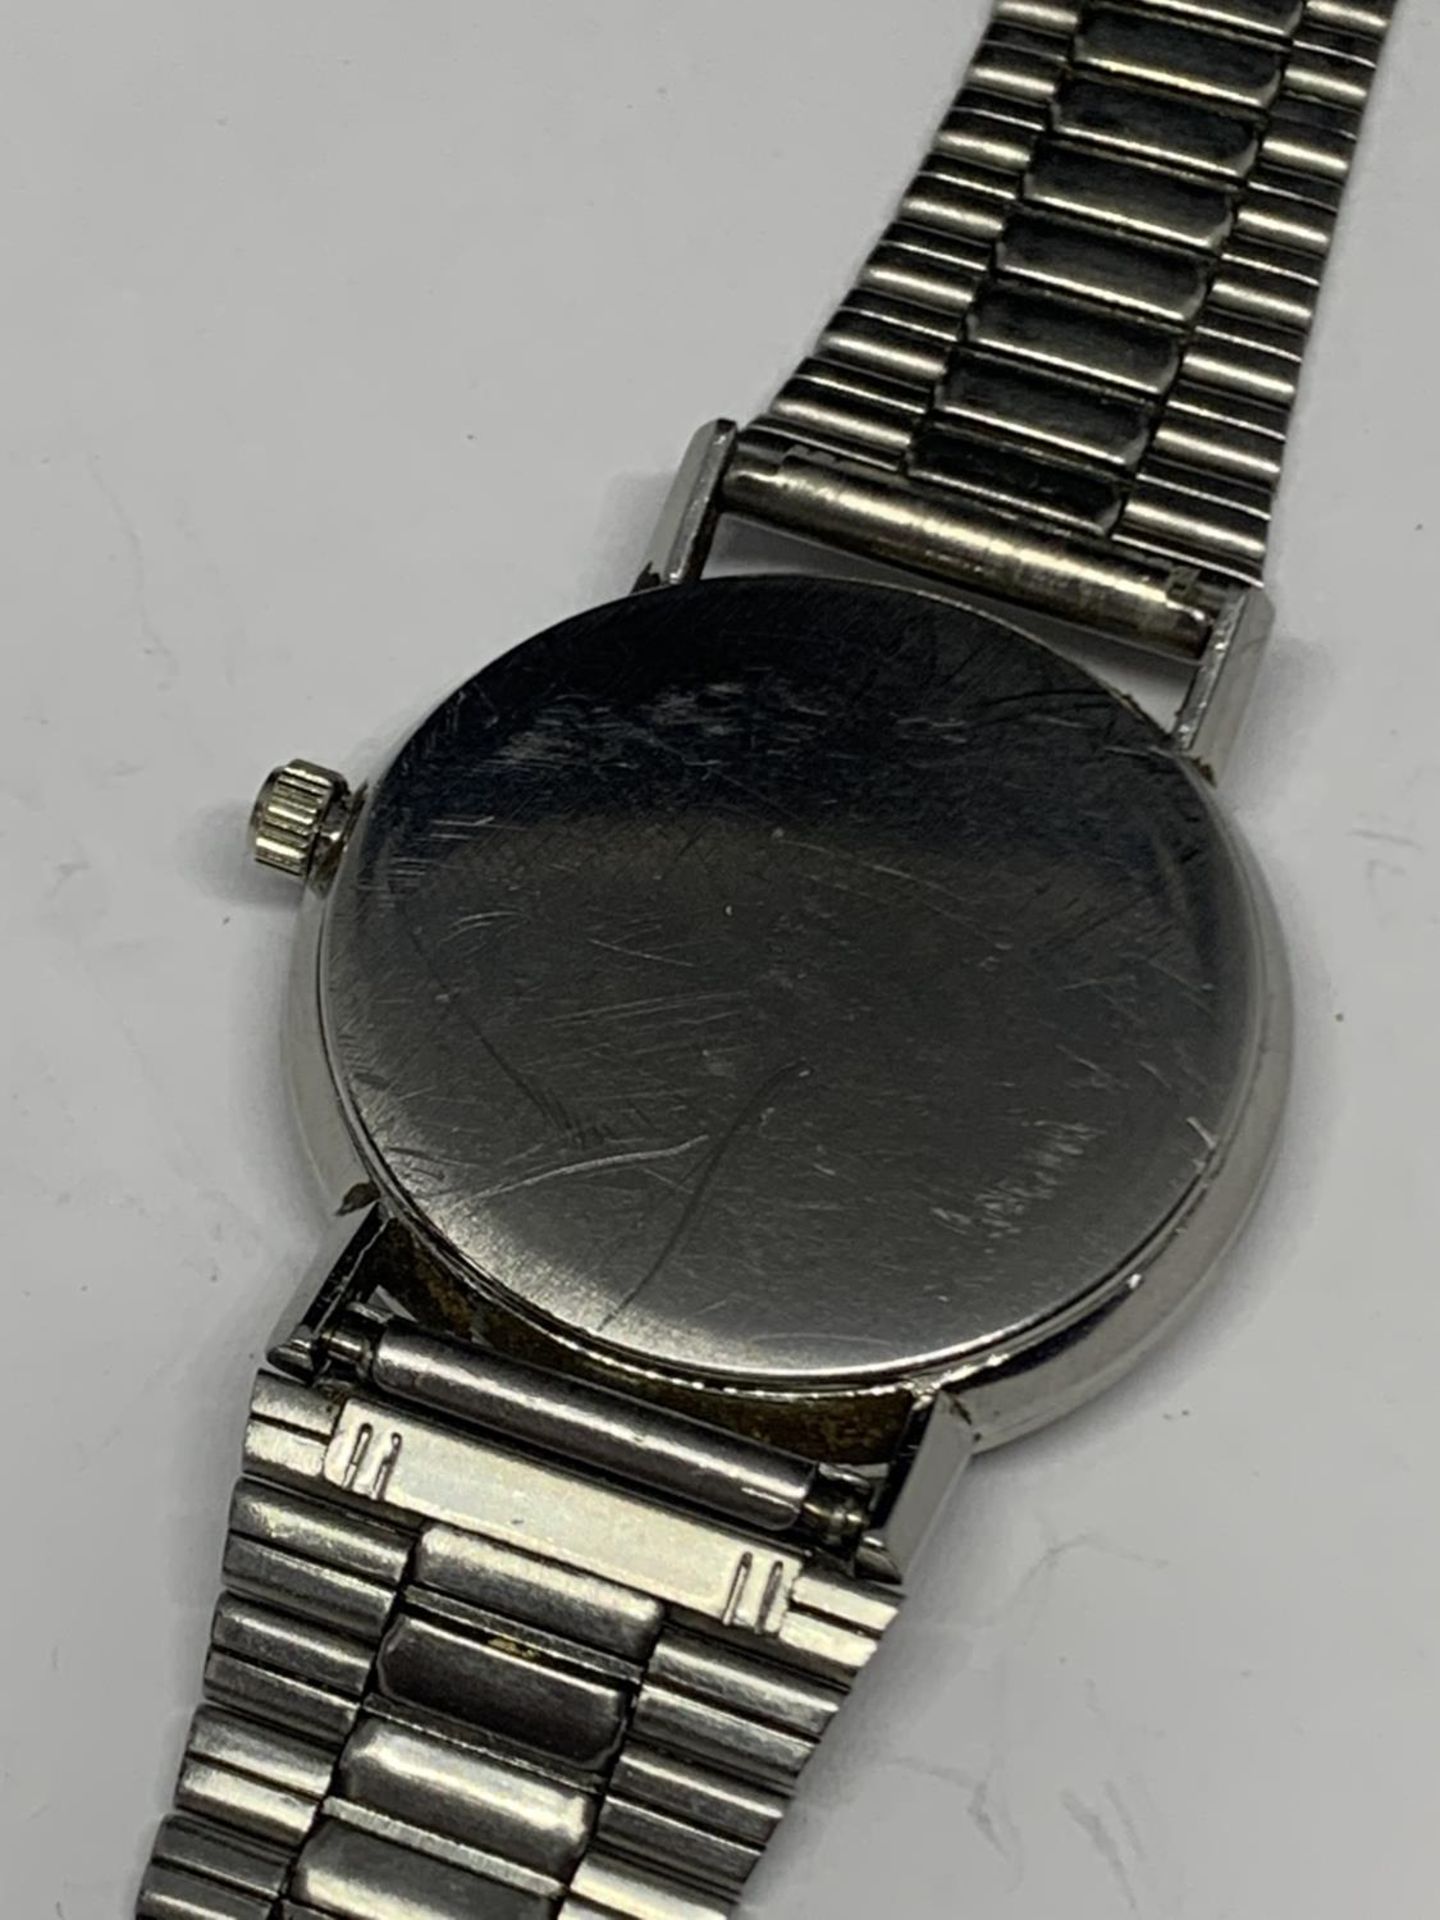 AN OMEGA GENEVE GENTS WRIST WATCH - Image 3 of 3